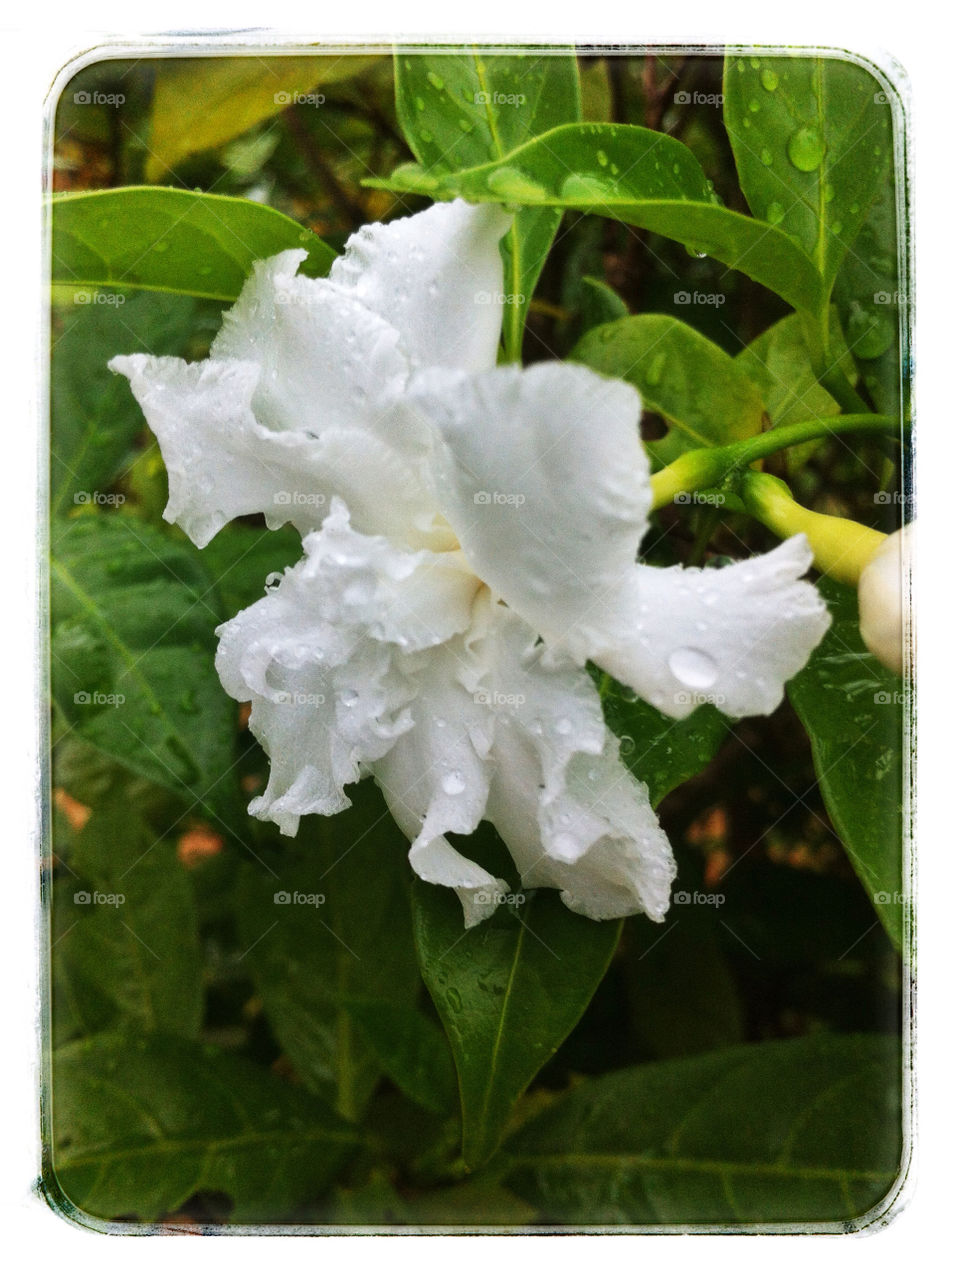 Water drops on the white flower